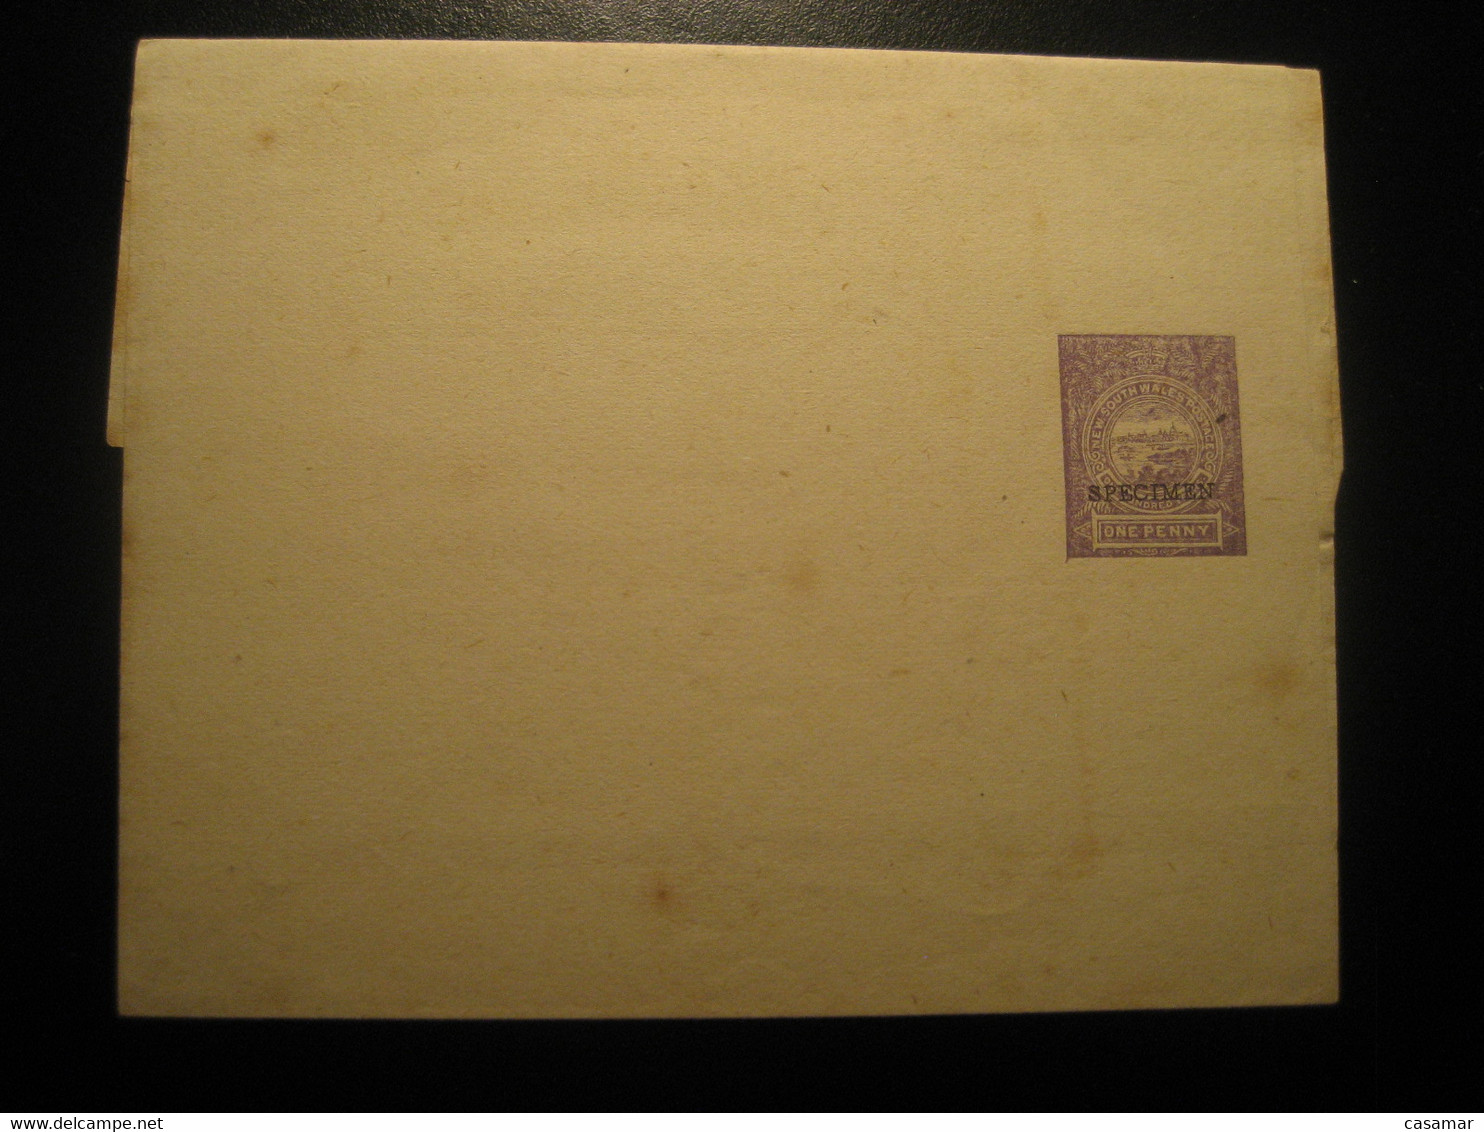 SPECIMEN Overprinted 1 Penny NEW SOUTH WALES Wrapper AUSTRALIA Postal Stationery Cover - Covers & Documents